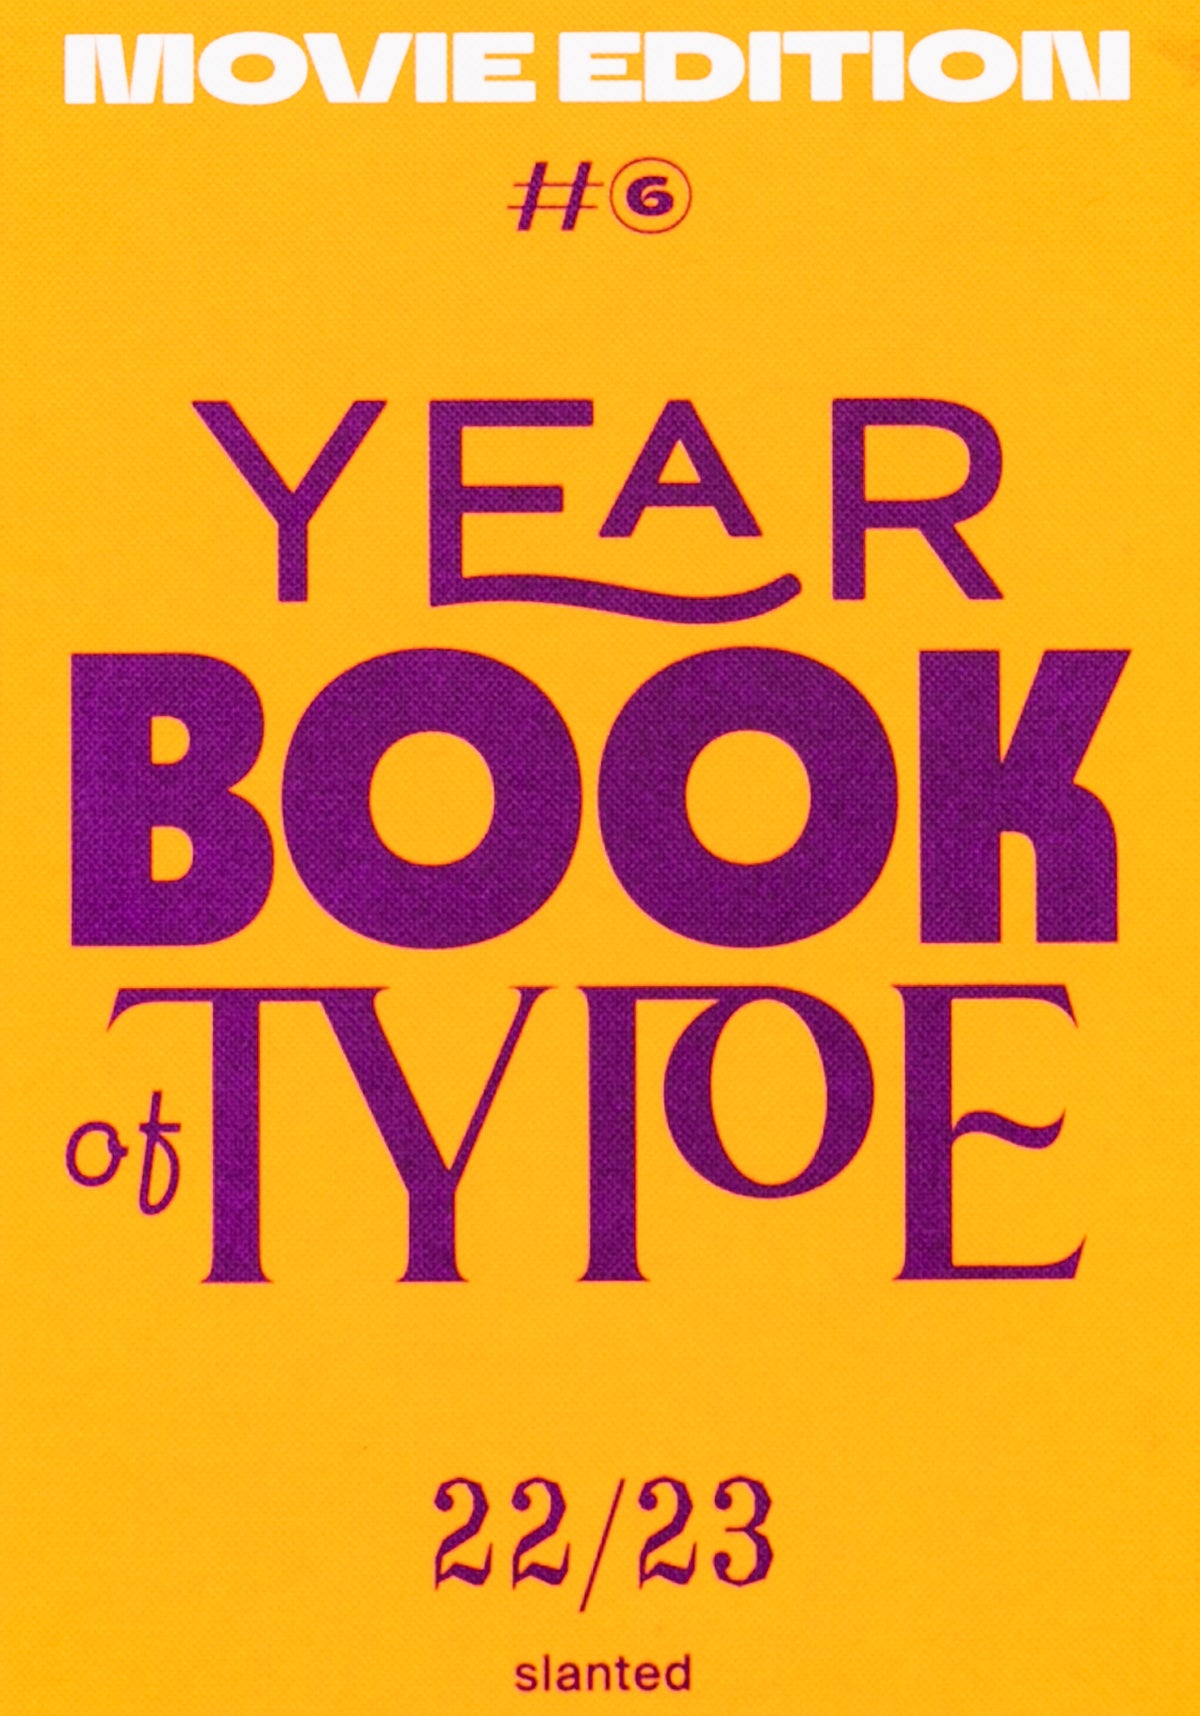 Yearbook of Type #6 2022/23: Movie Edition